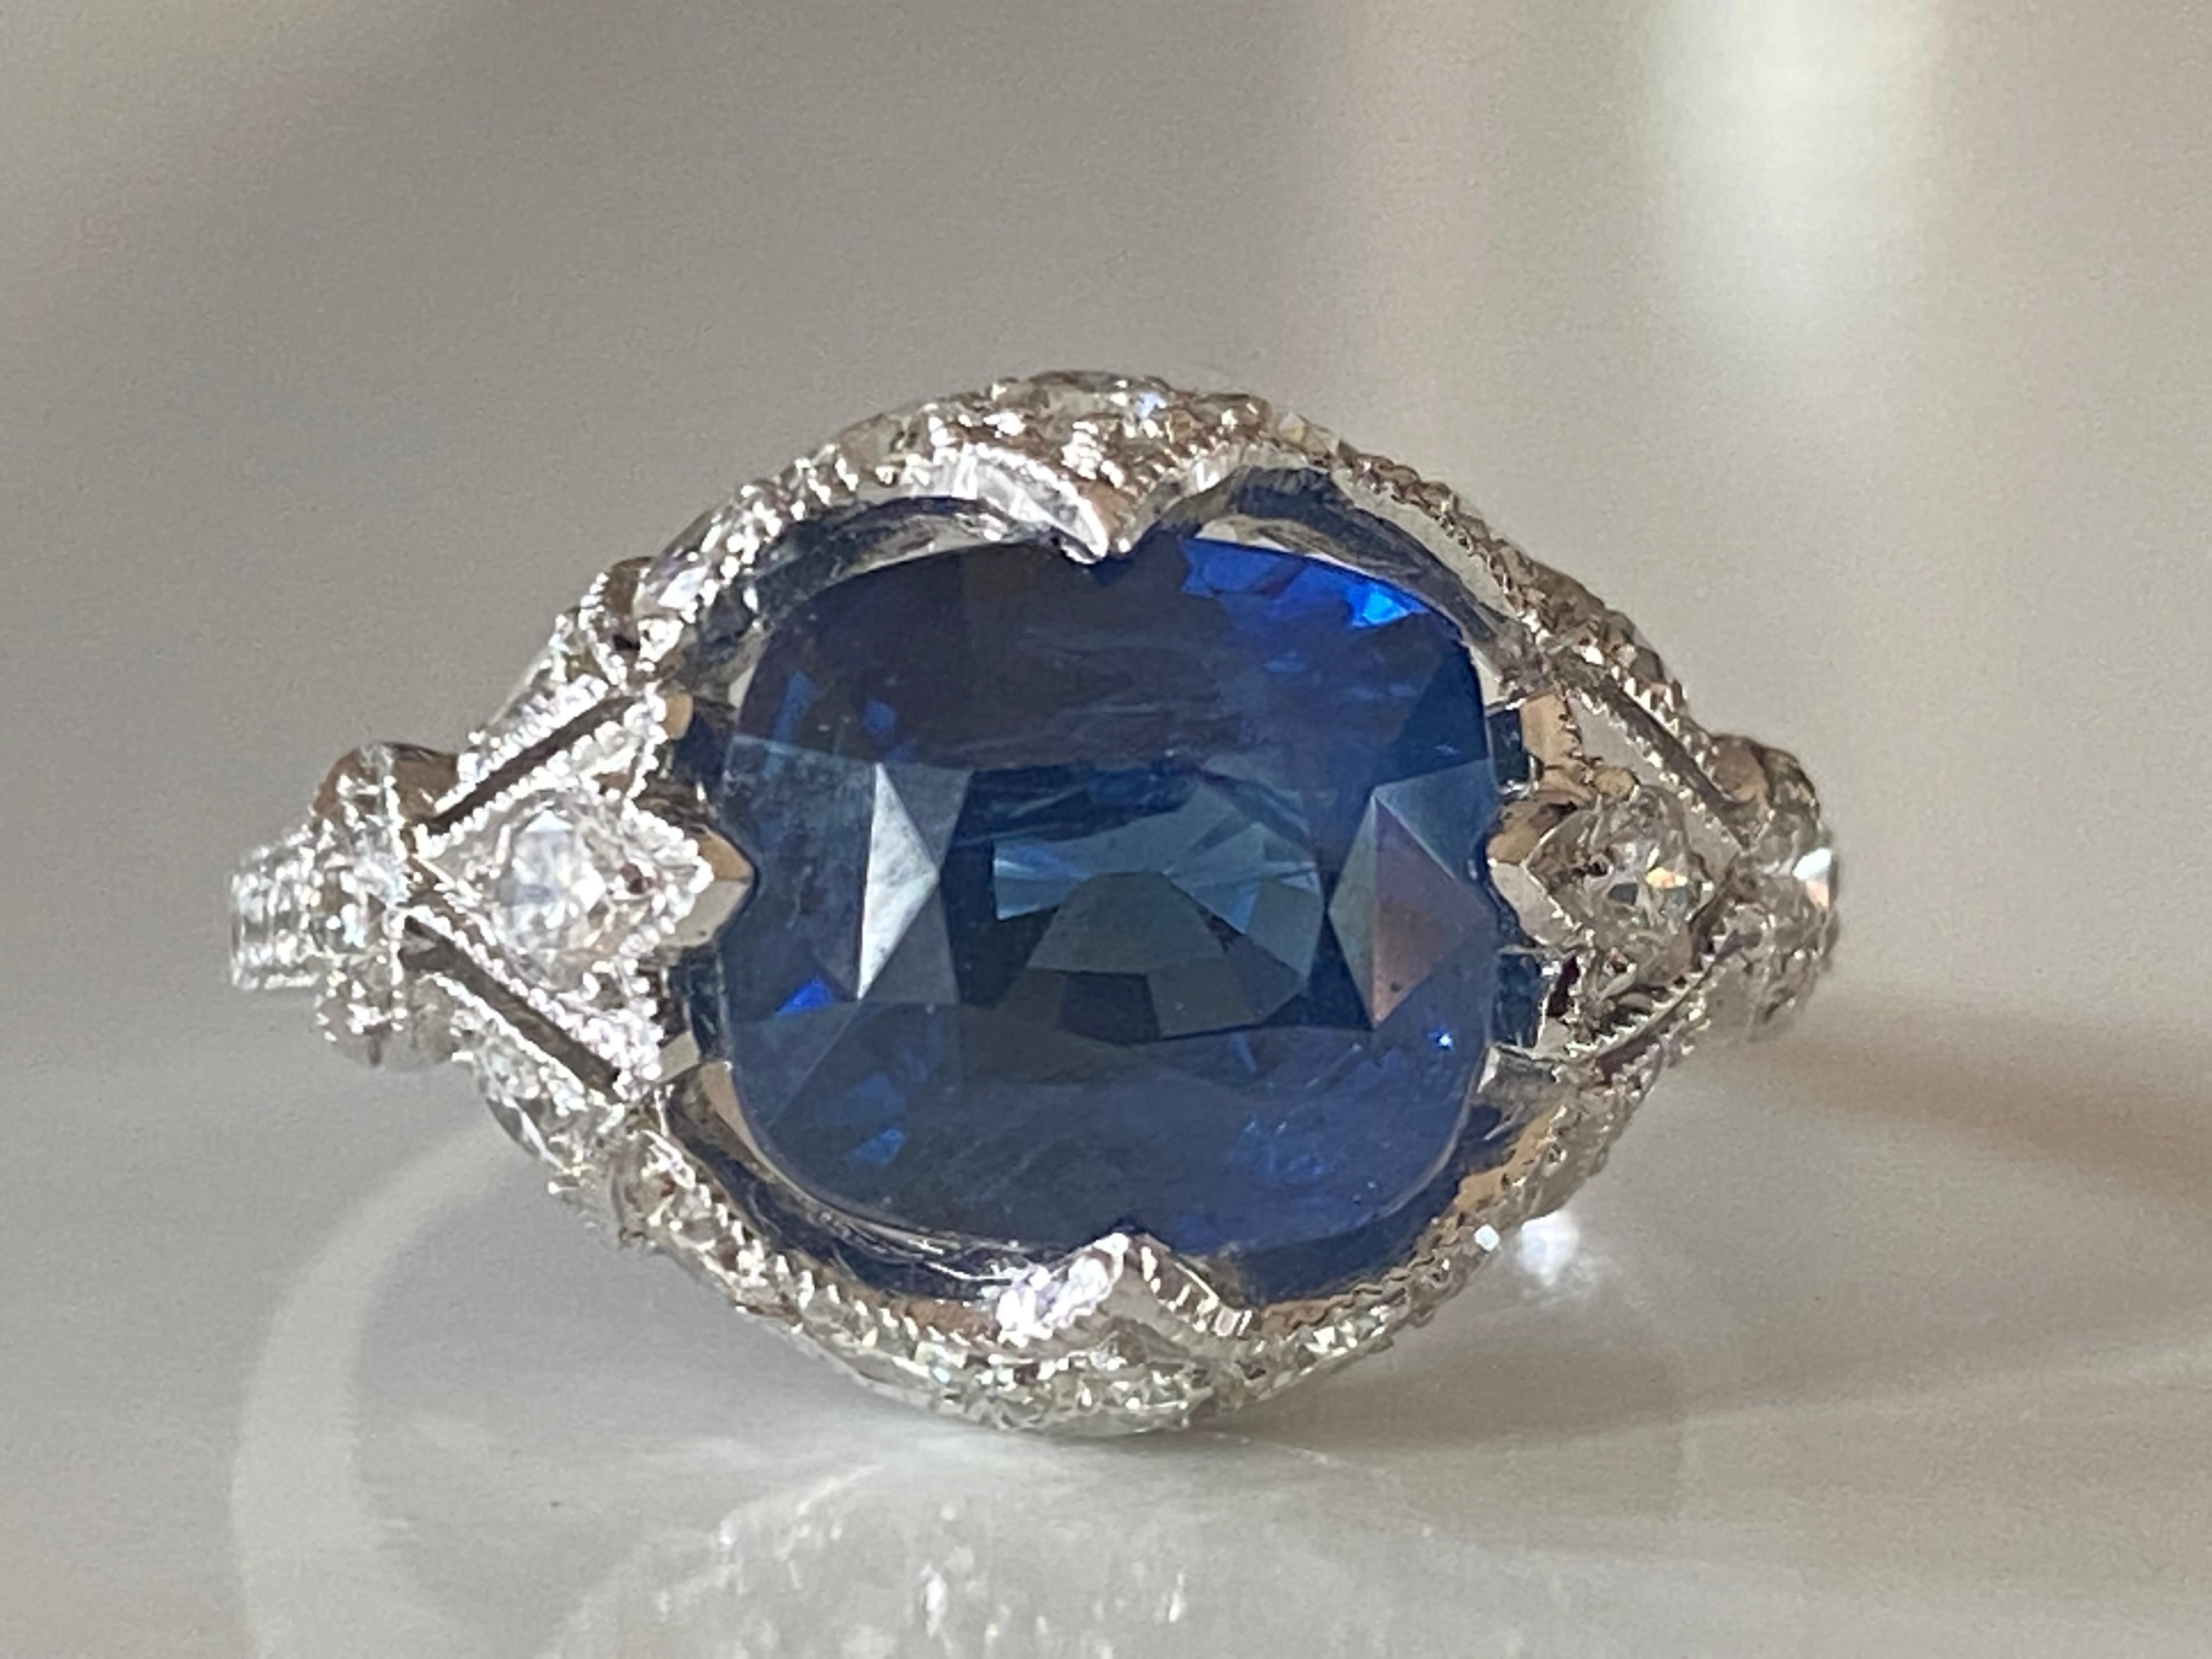 This stunning Estate gem features a cushion cut Sri Lankan natural blue sapphire measuring approximately 3.89 carats and adorned with 26 round-brilliant diamonds totaling approximately 1.00 carat set in 18kt white gold.
